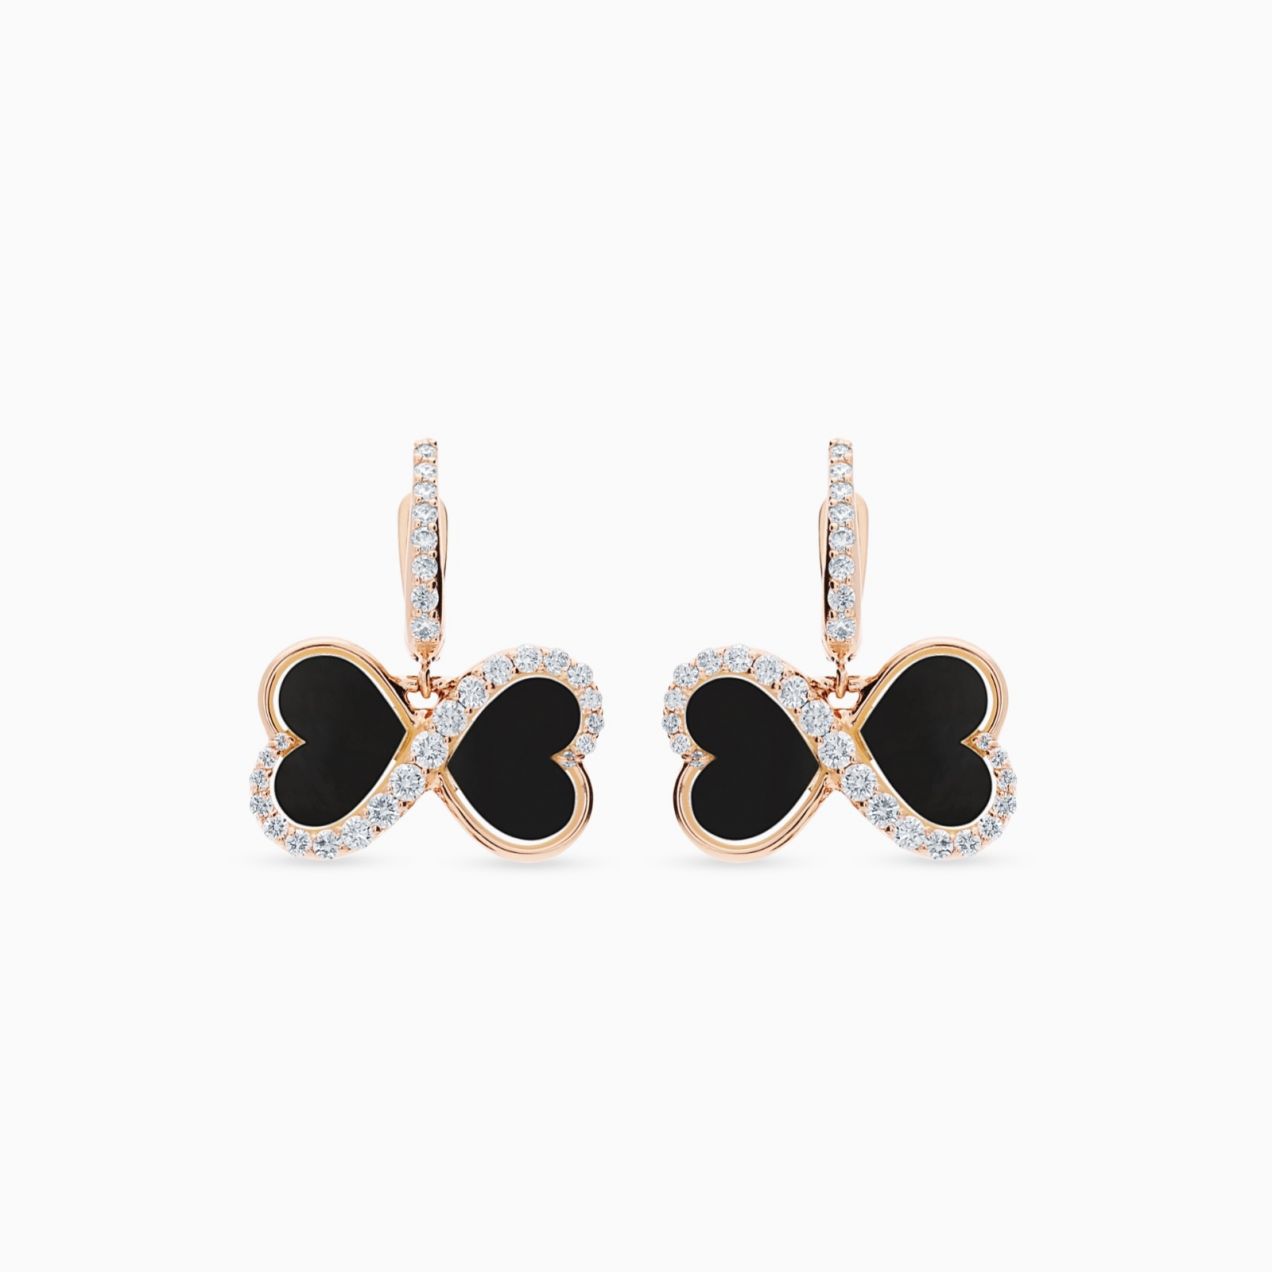 Infinity symbol earrings in rose gold with heart-cut onyx and diamonds